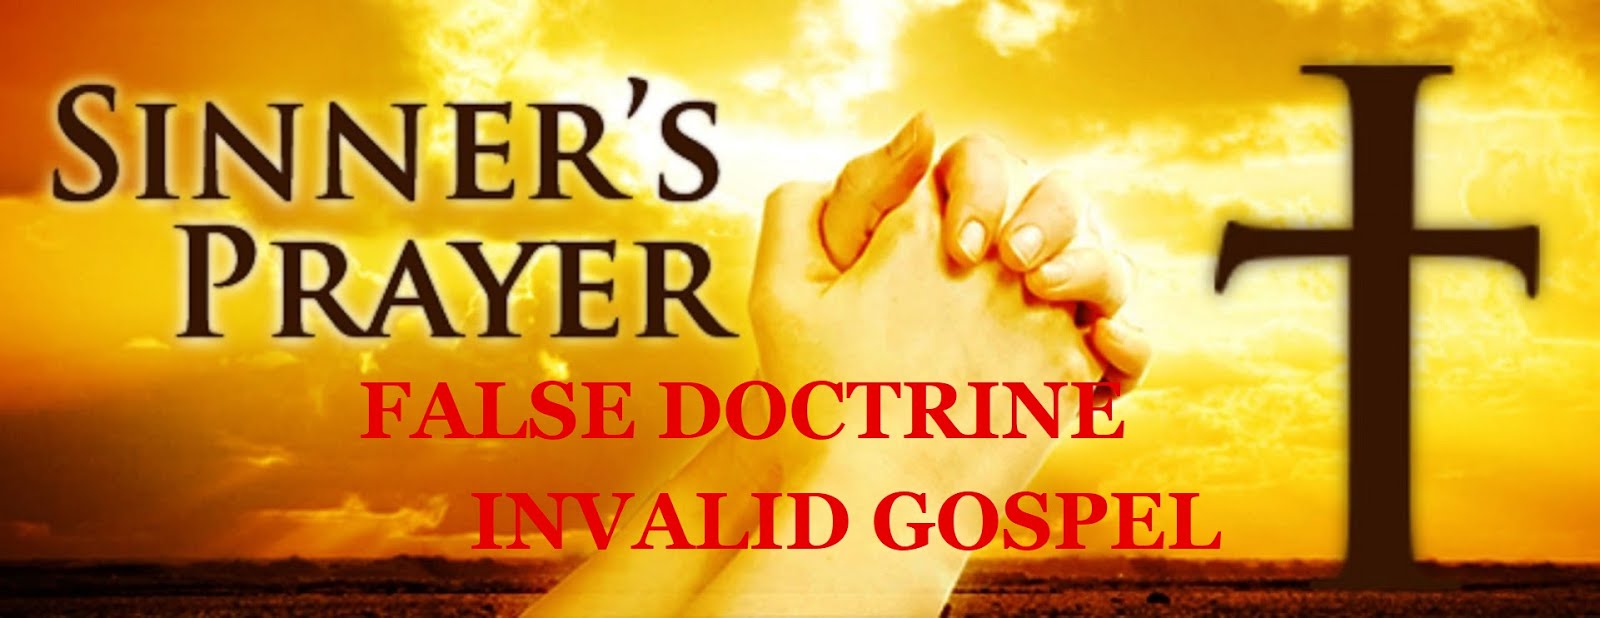 THE SINNER'S PRAYER - IS THE GREAT DECEPTION